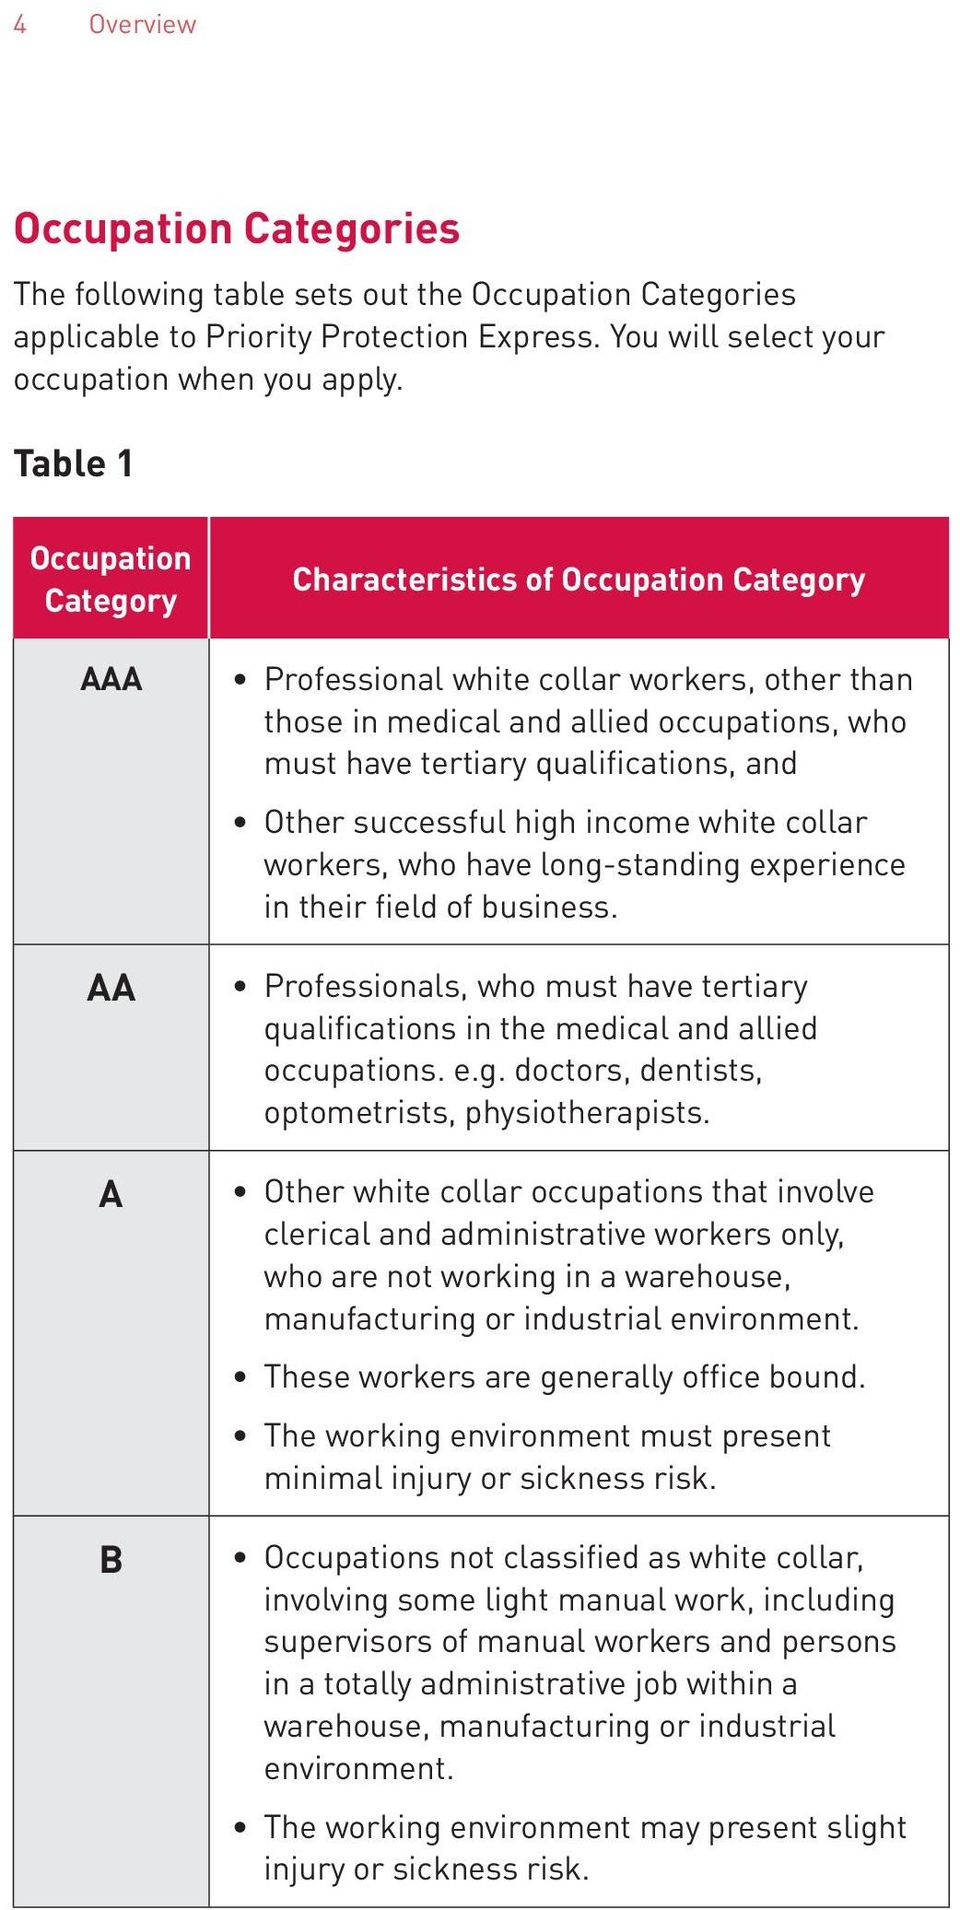 qualifications, and Other successful high income white collar workers, who have long-standing experience in their field of business.